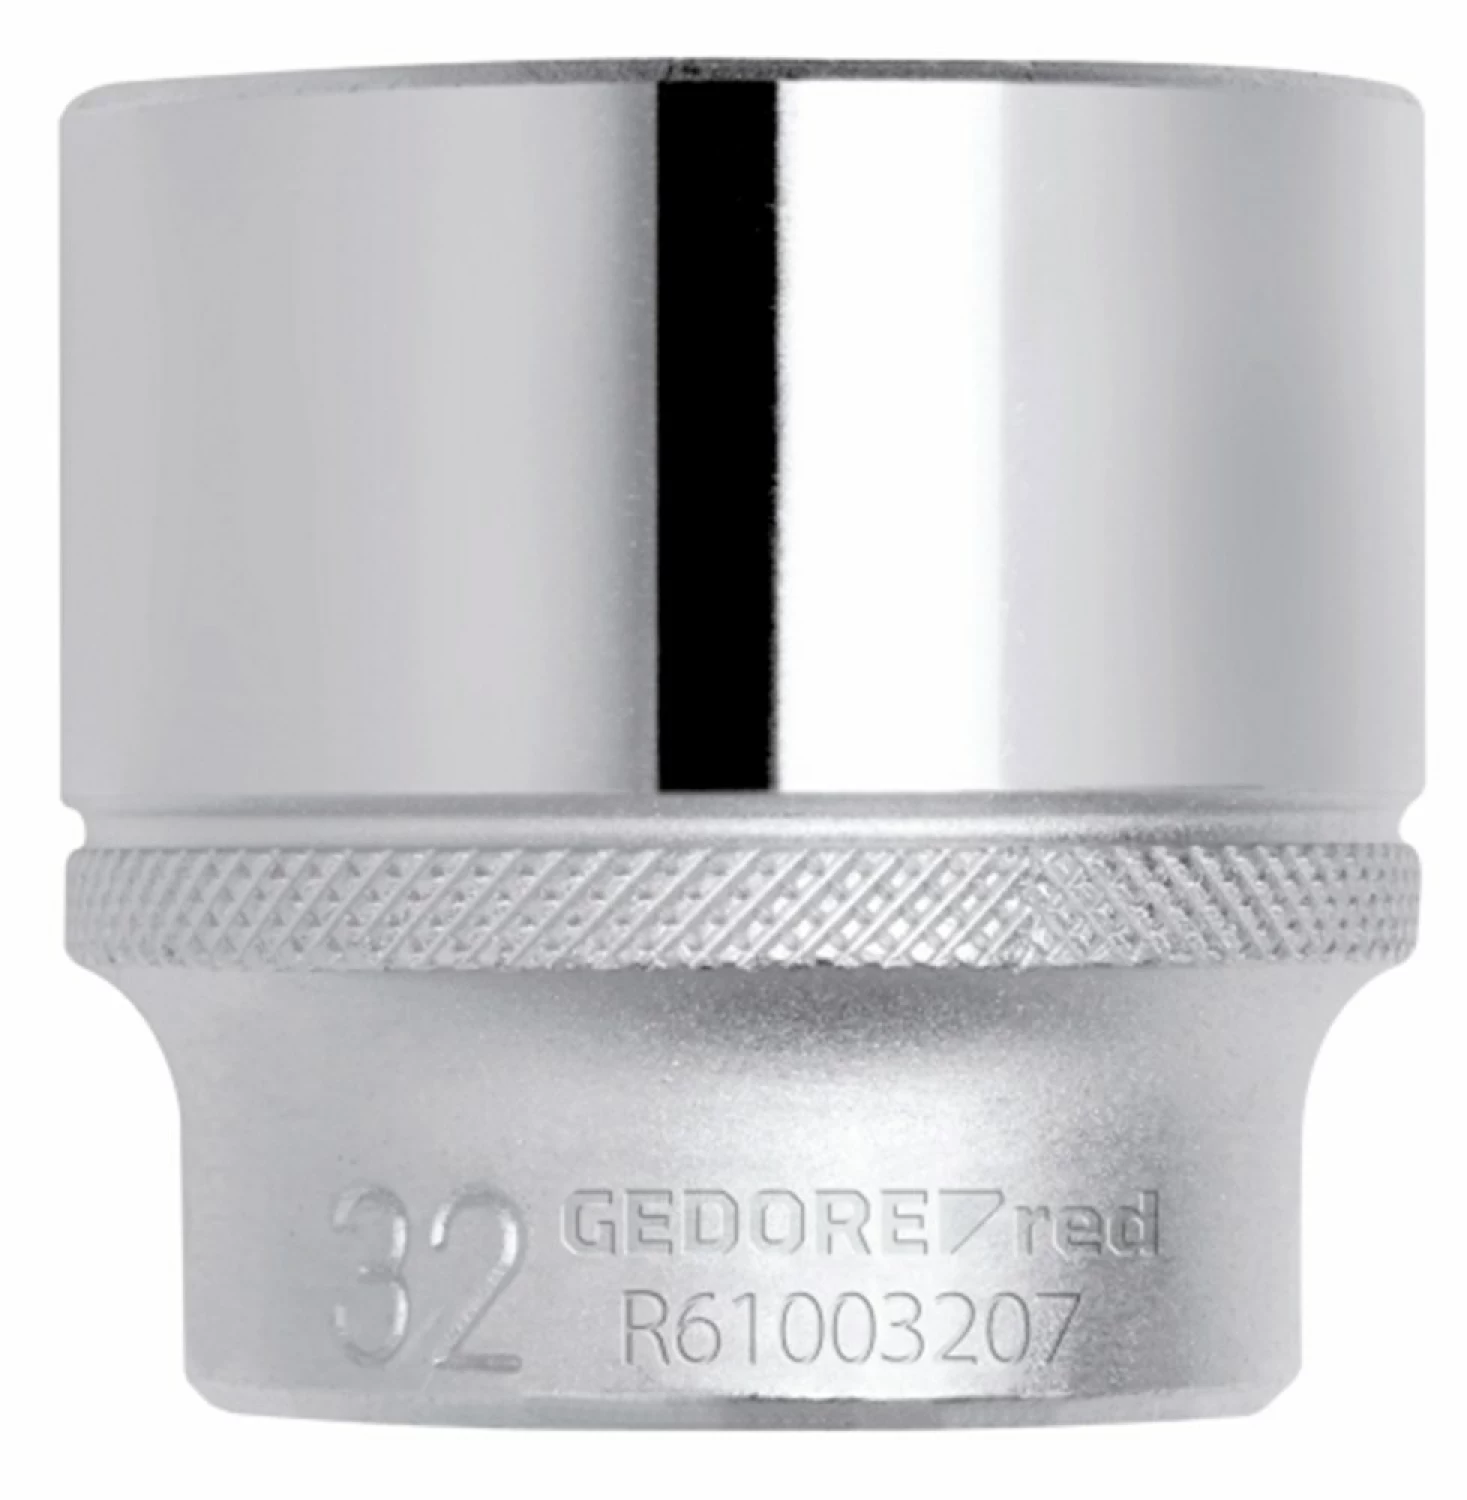 Gedore RED R61002206 Dopsleutel - 1/2" - 22 x 38mm